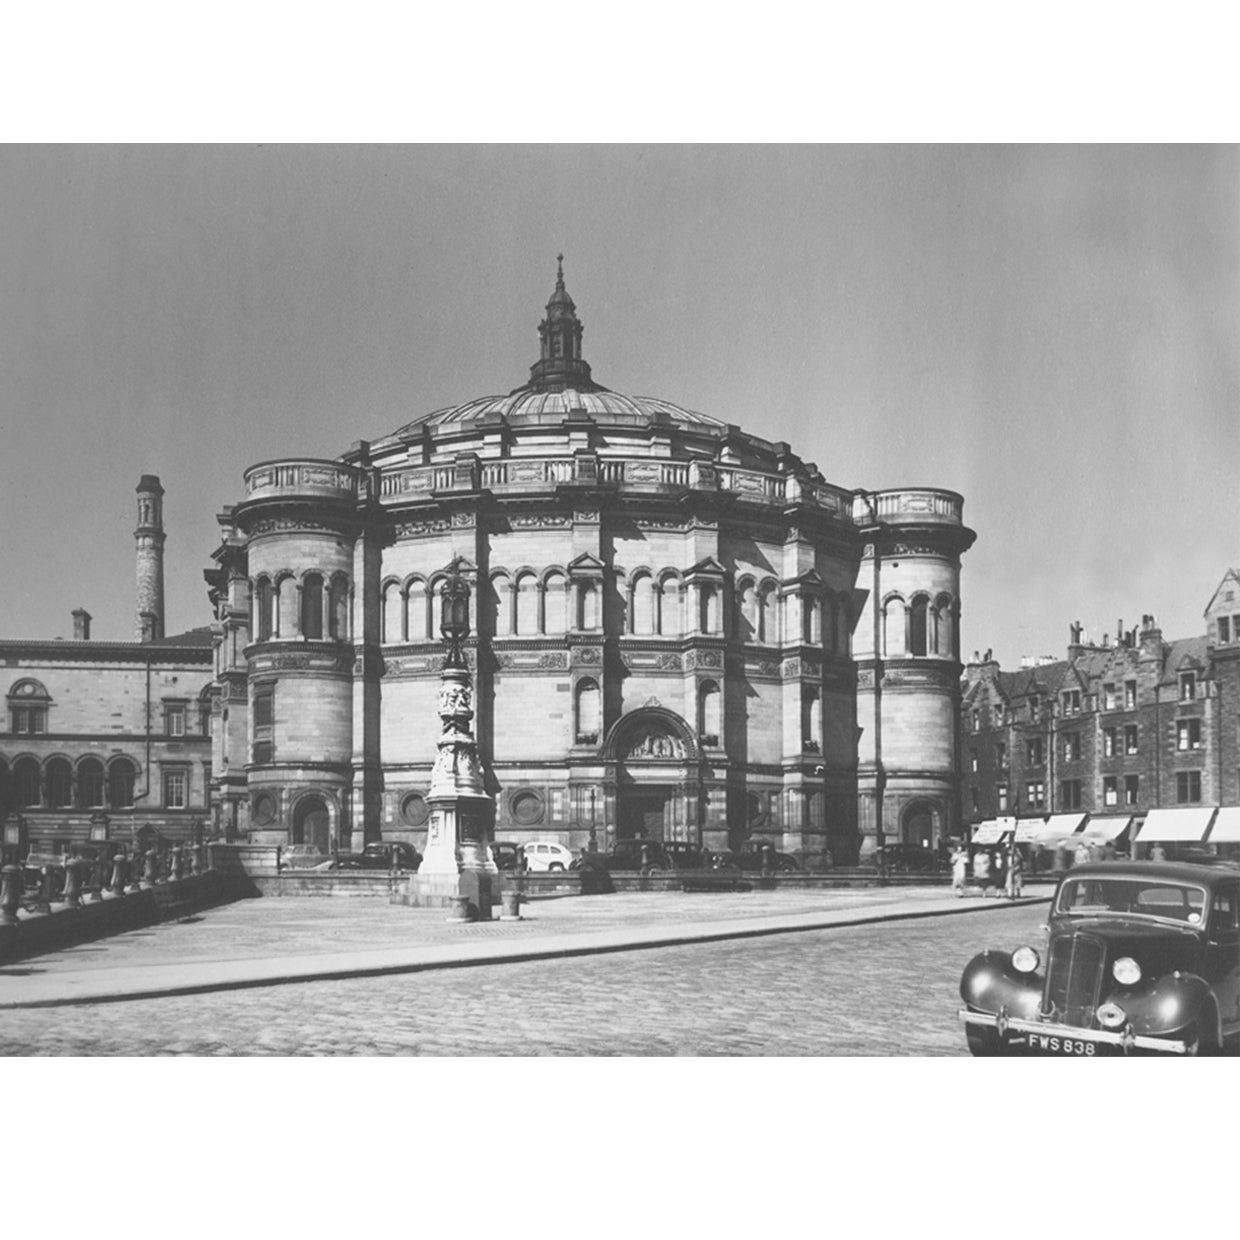 Black and white image of McEwan Hall